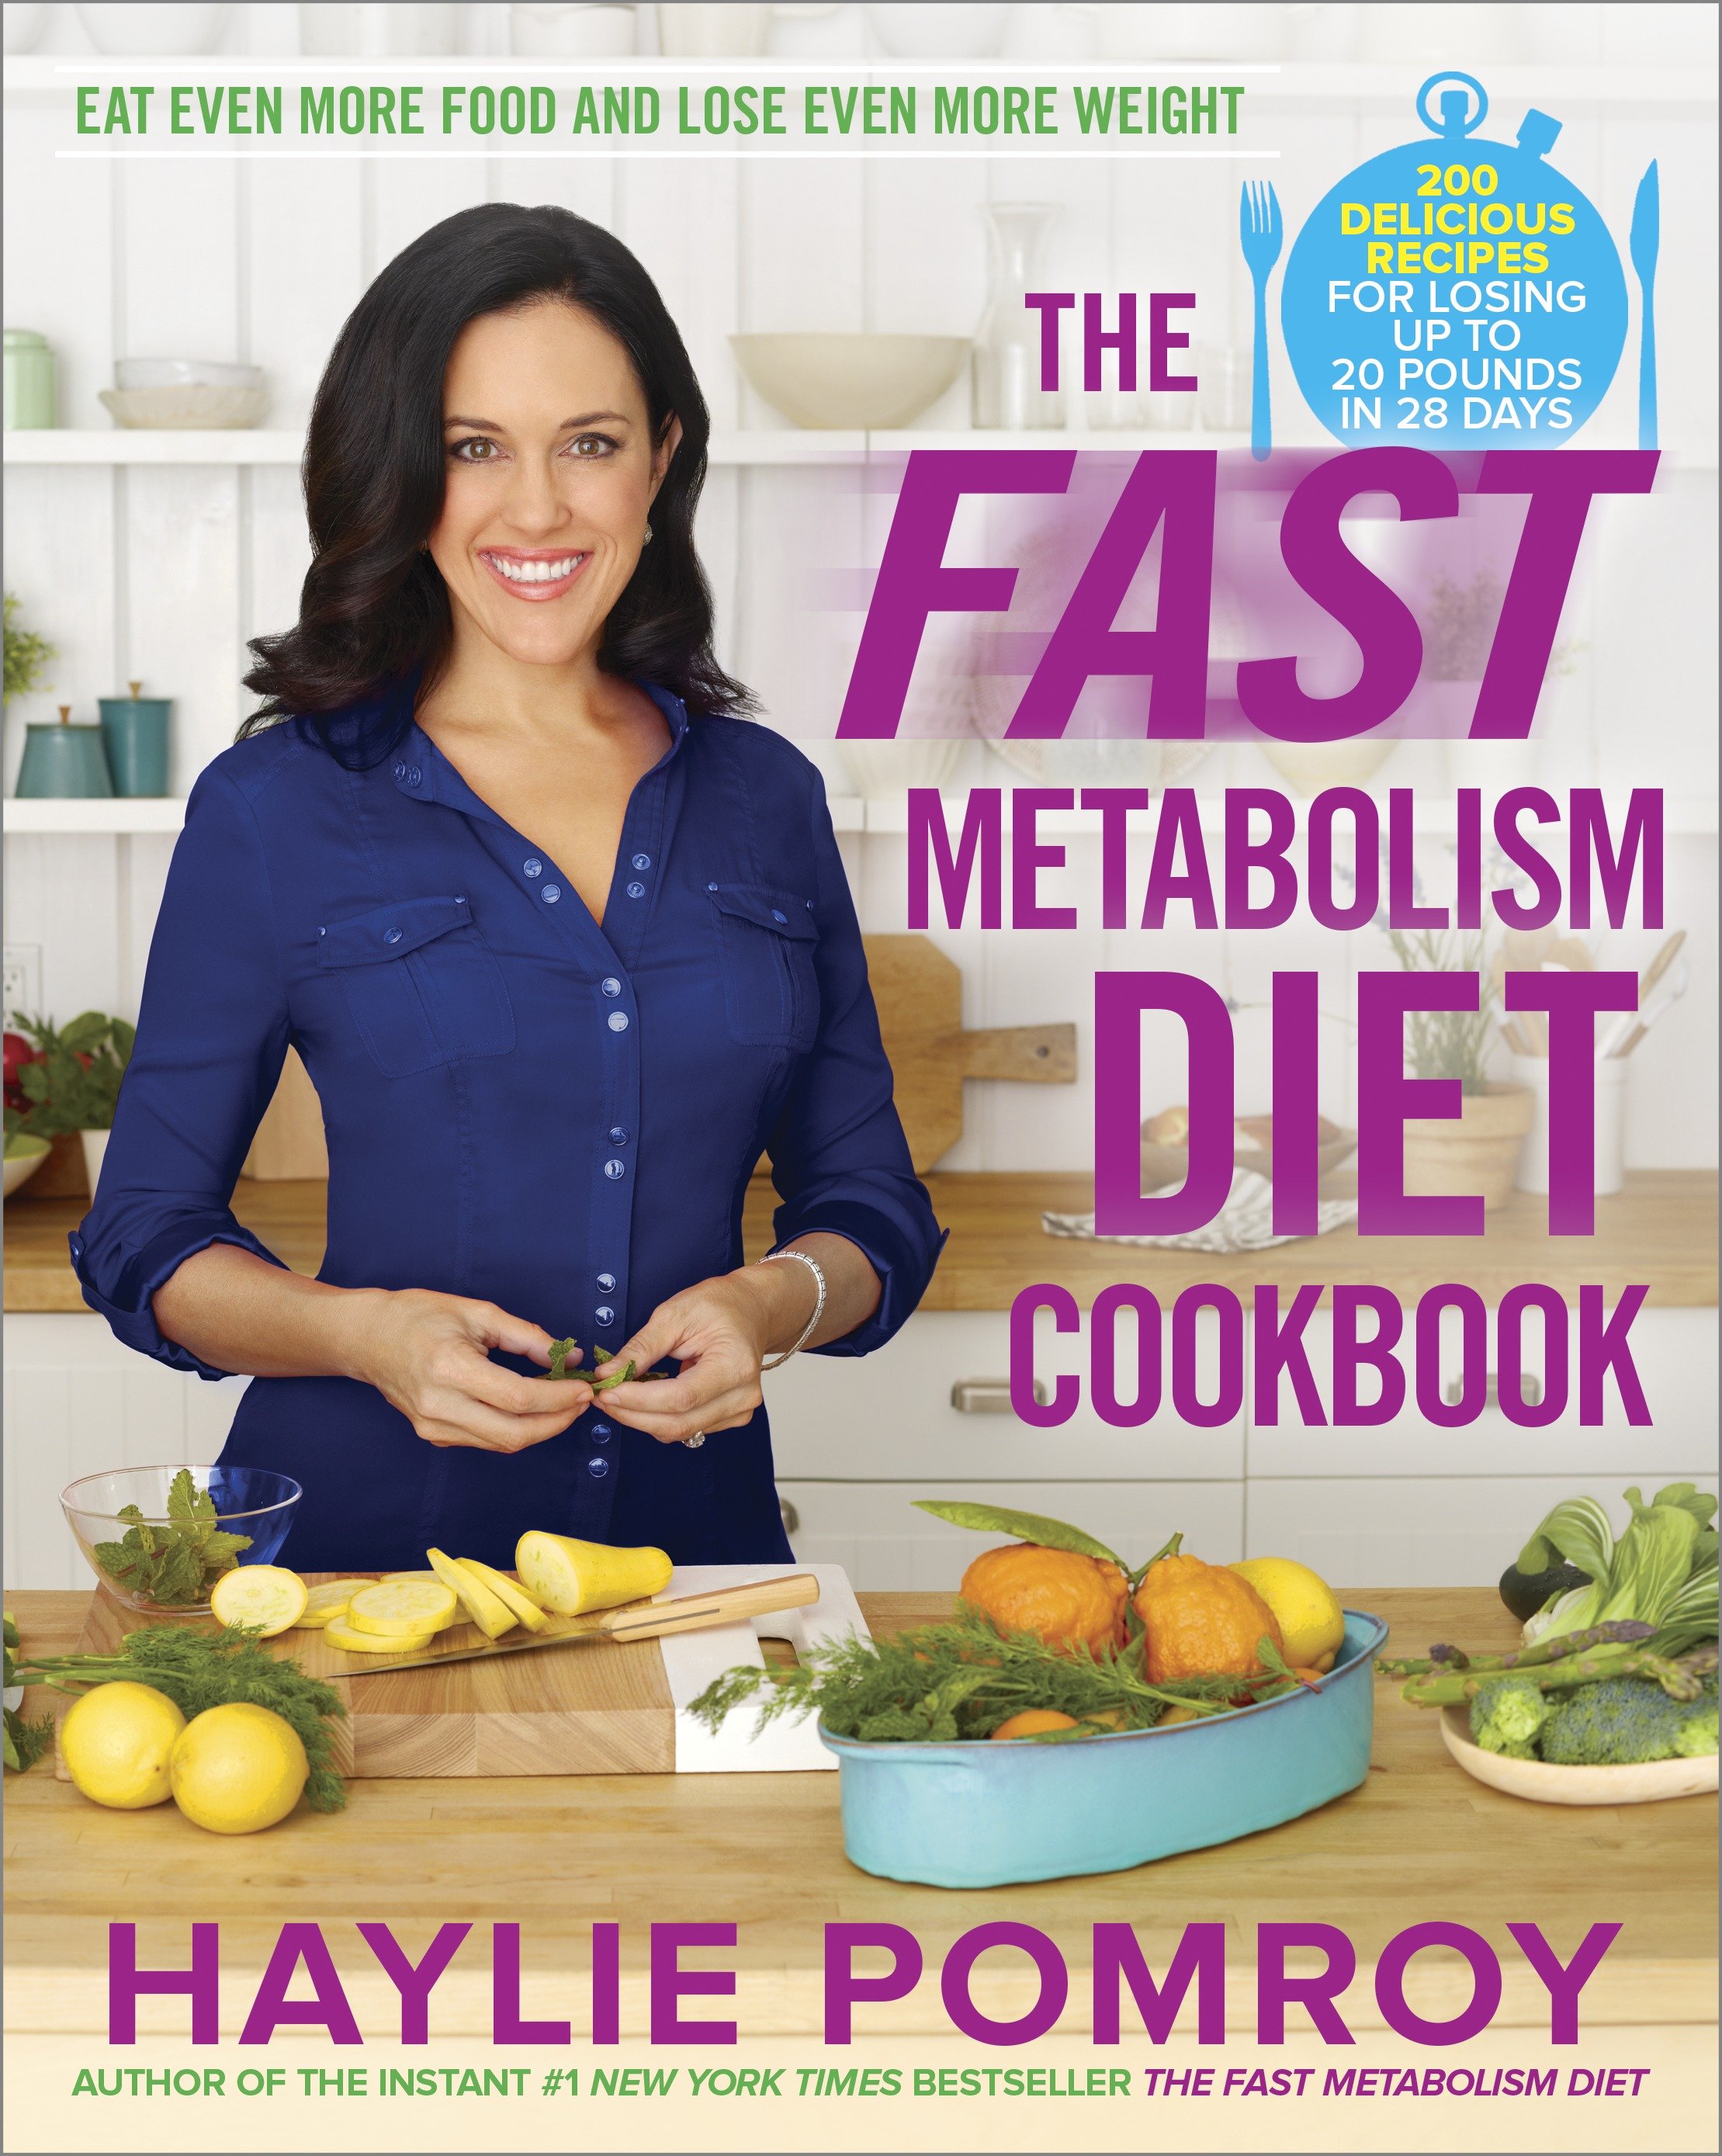 The fast metabolism diet cookbook eat even more food and lose even more weight cover image